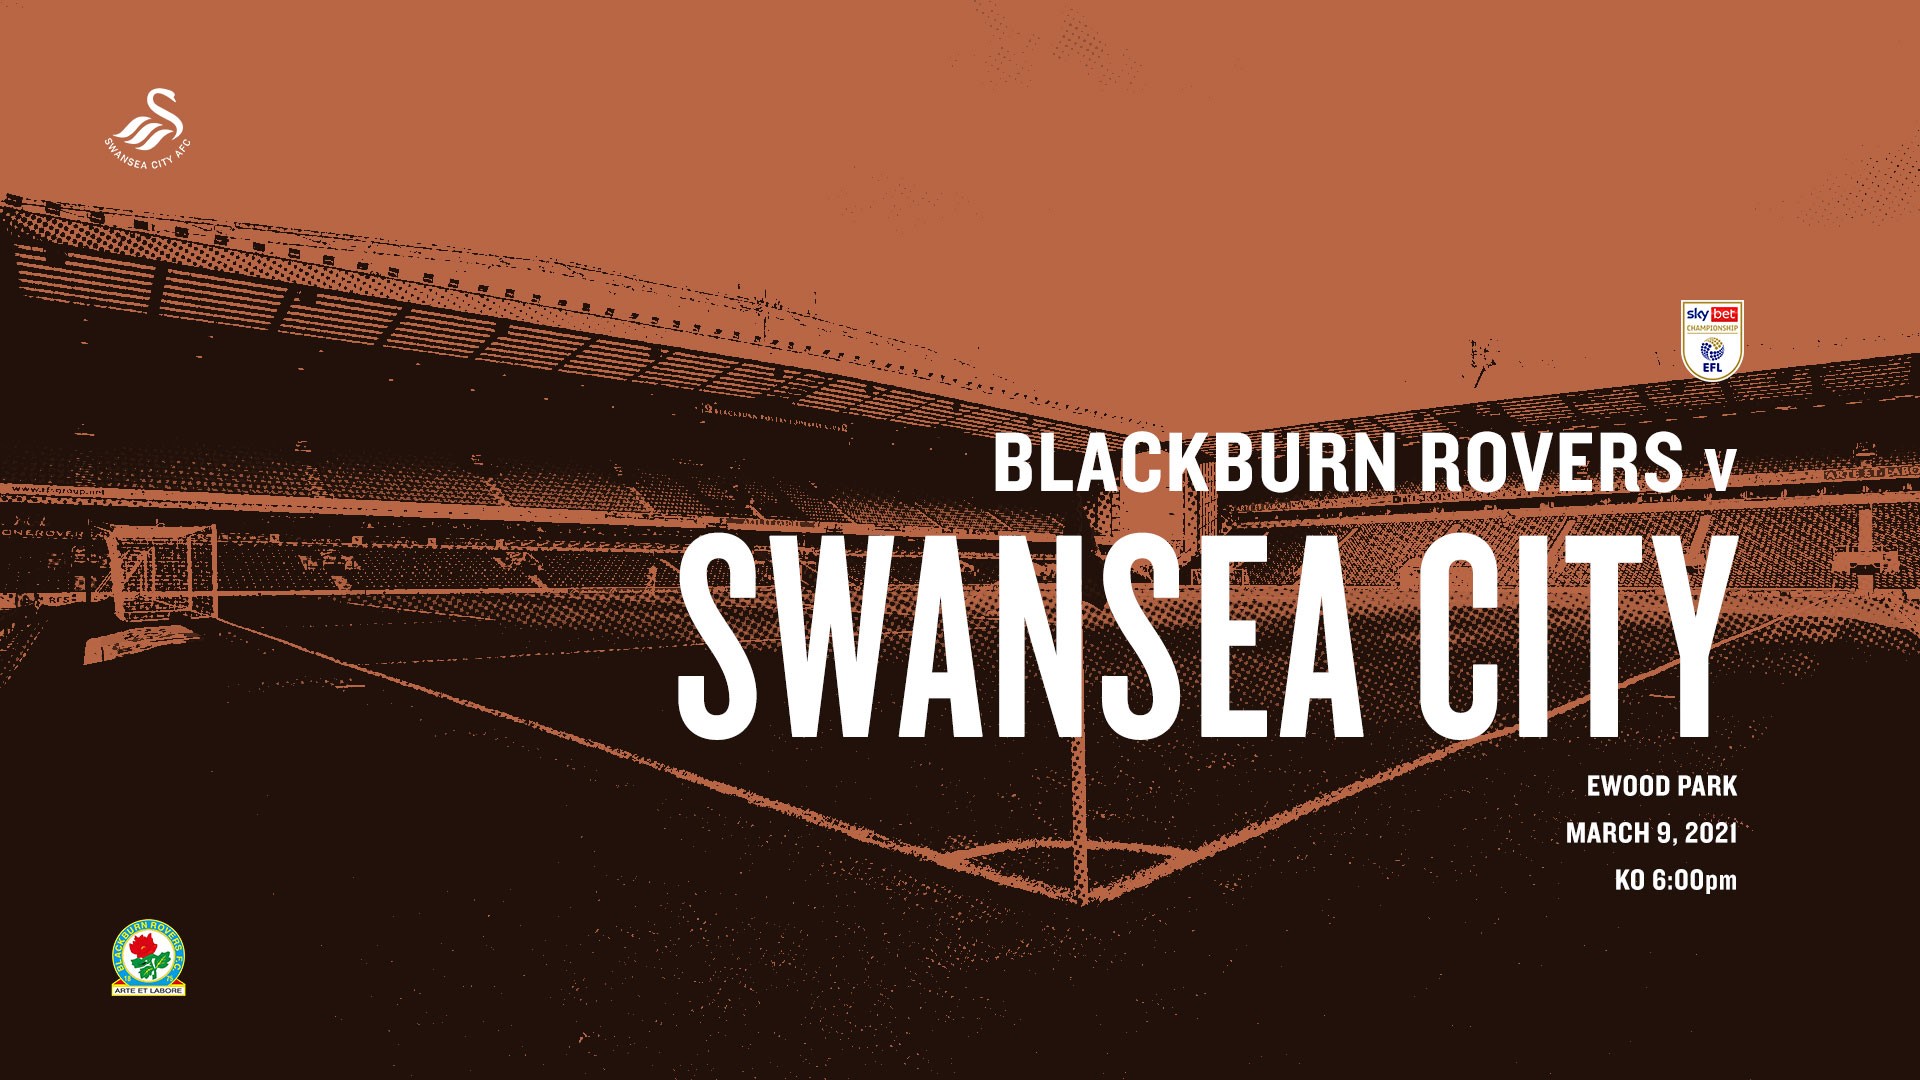 Blackburn away preview graphic